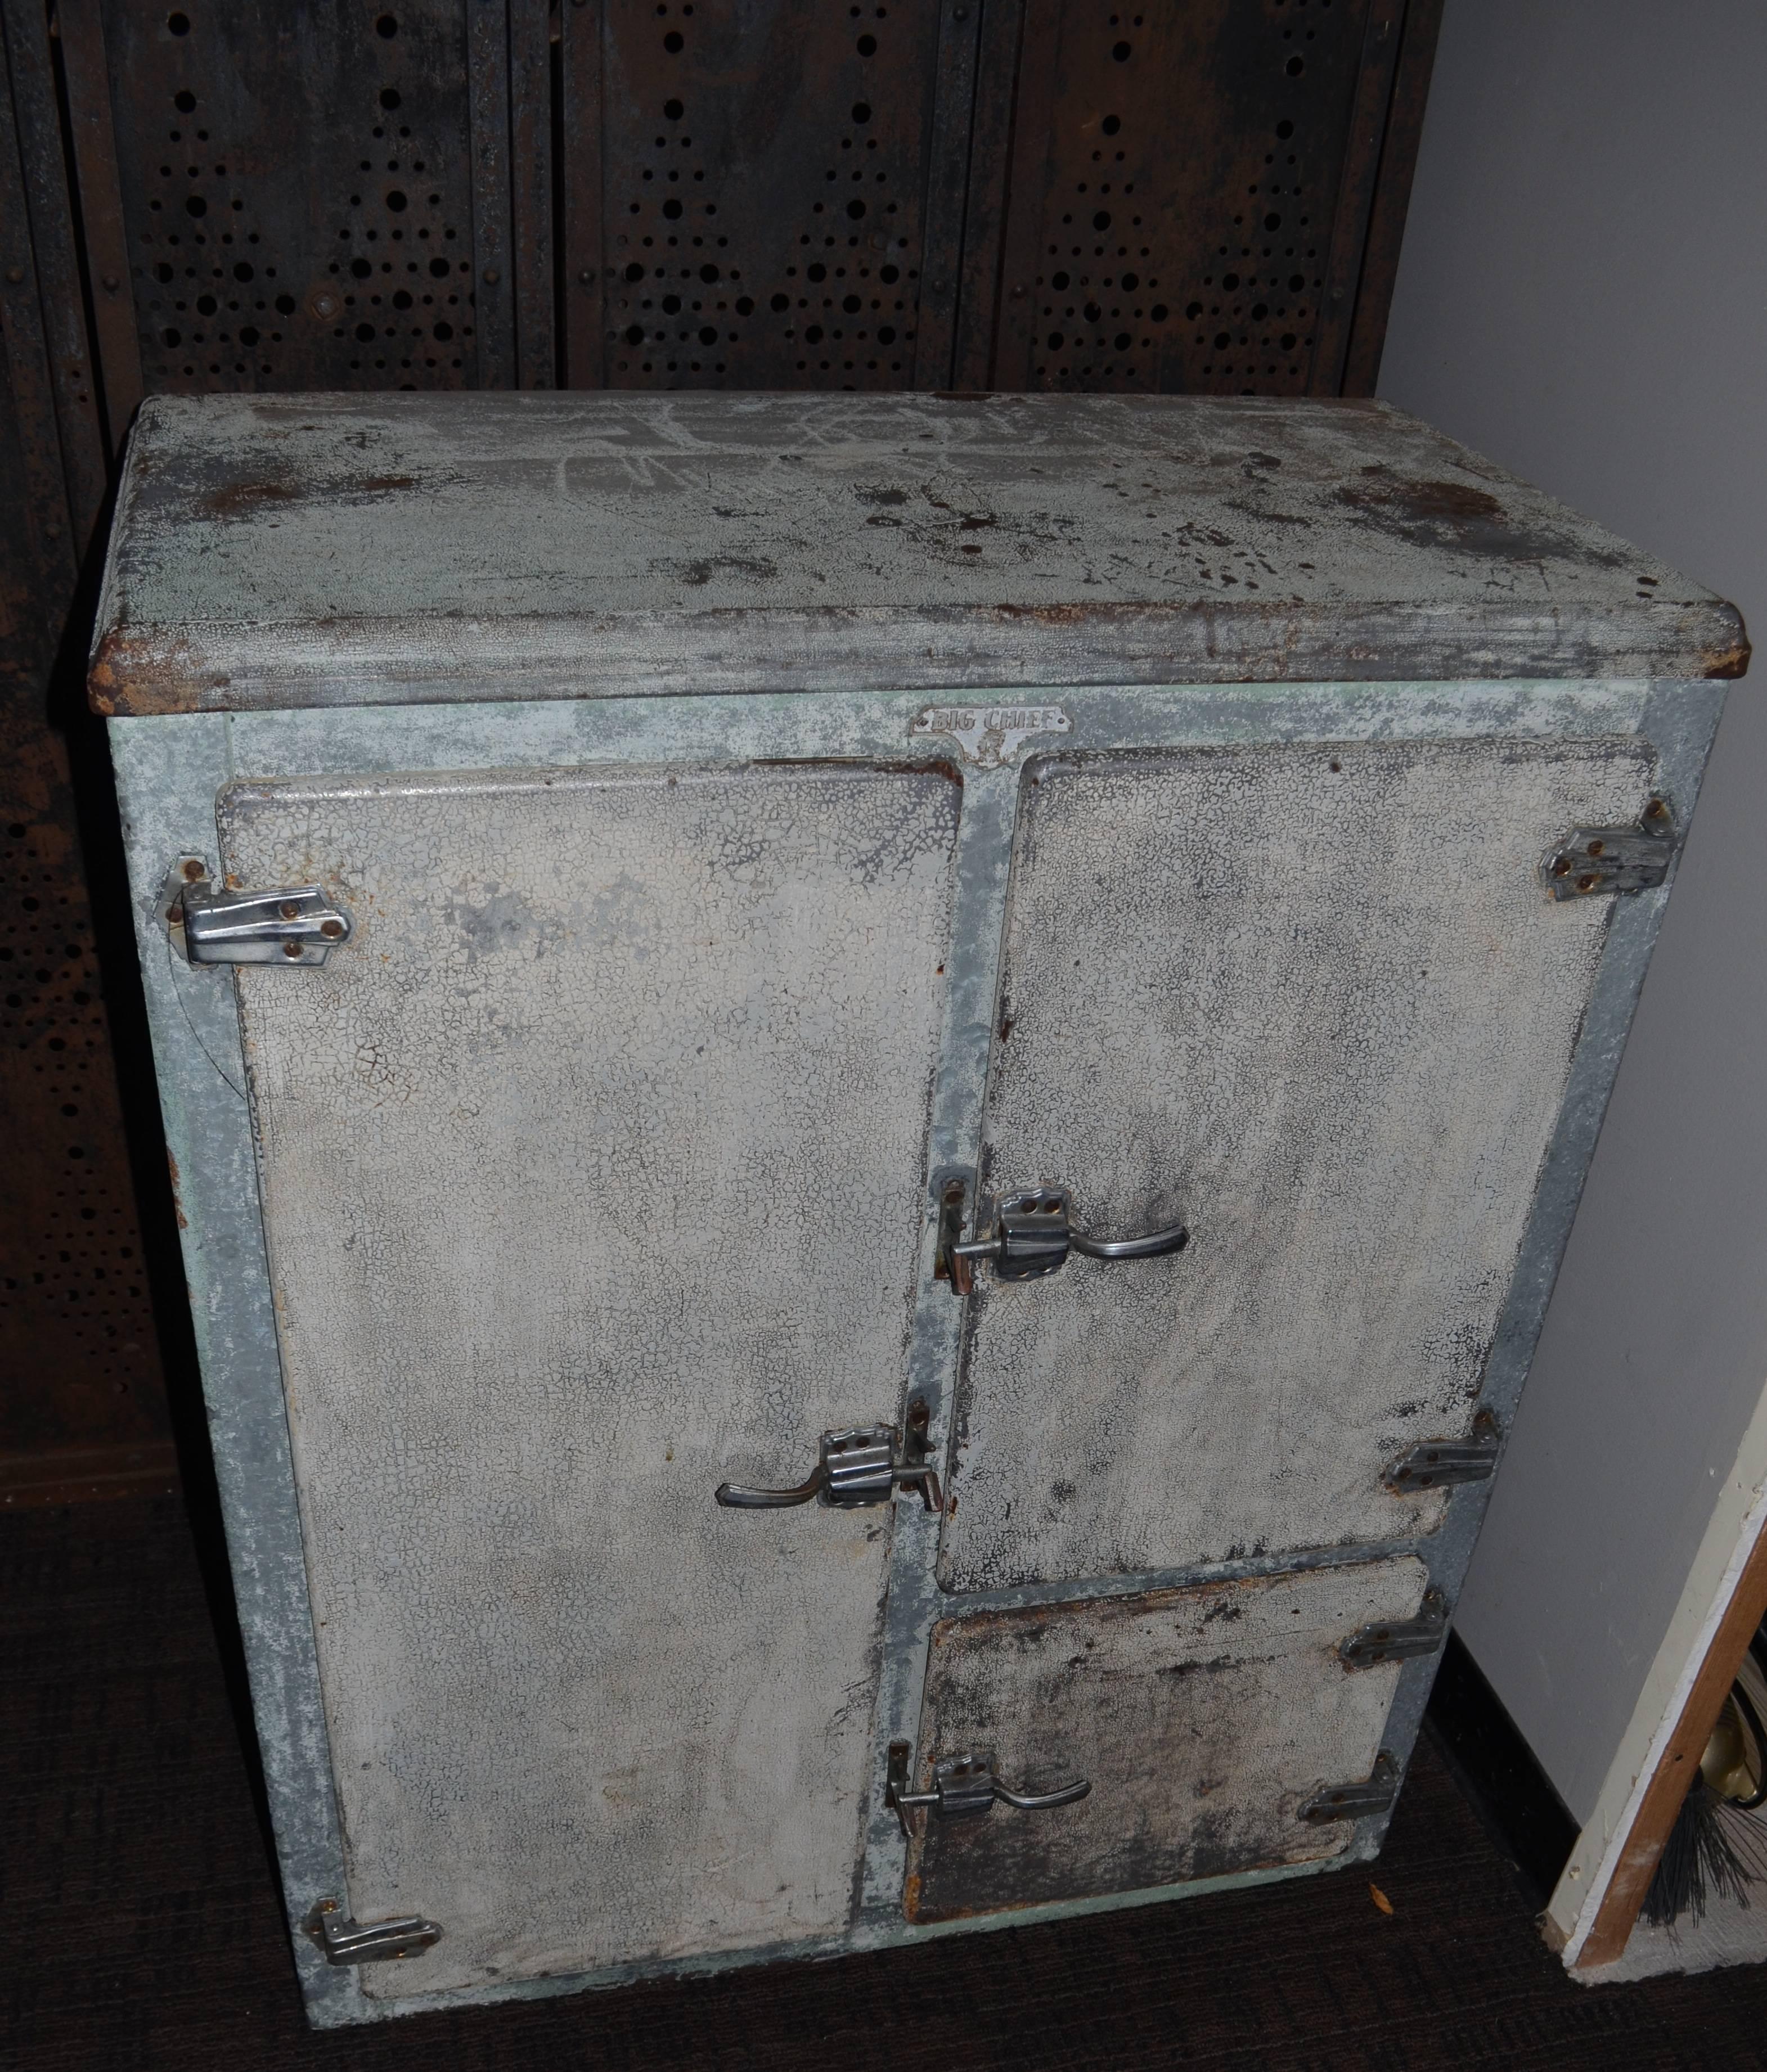 1920s big chief refrigerator makes a neat home bar and storage cabinet. Tactile, paint patina has been cleaned and sealed with clear acrylic. Doors latch tightly with steel shelves inside.